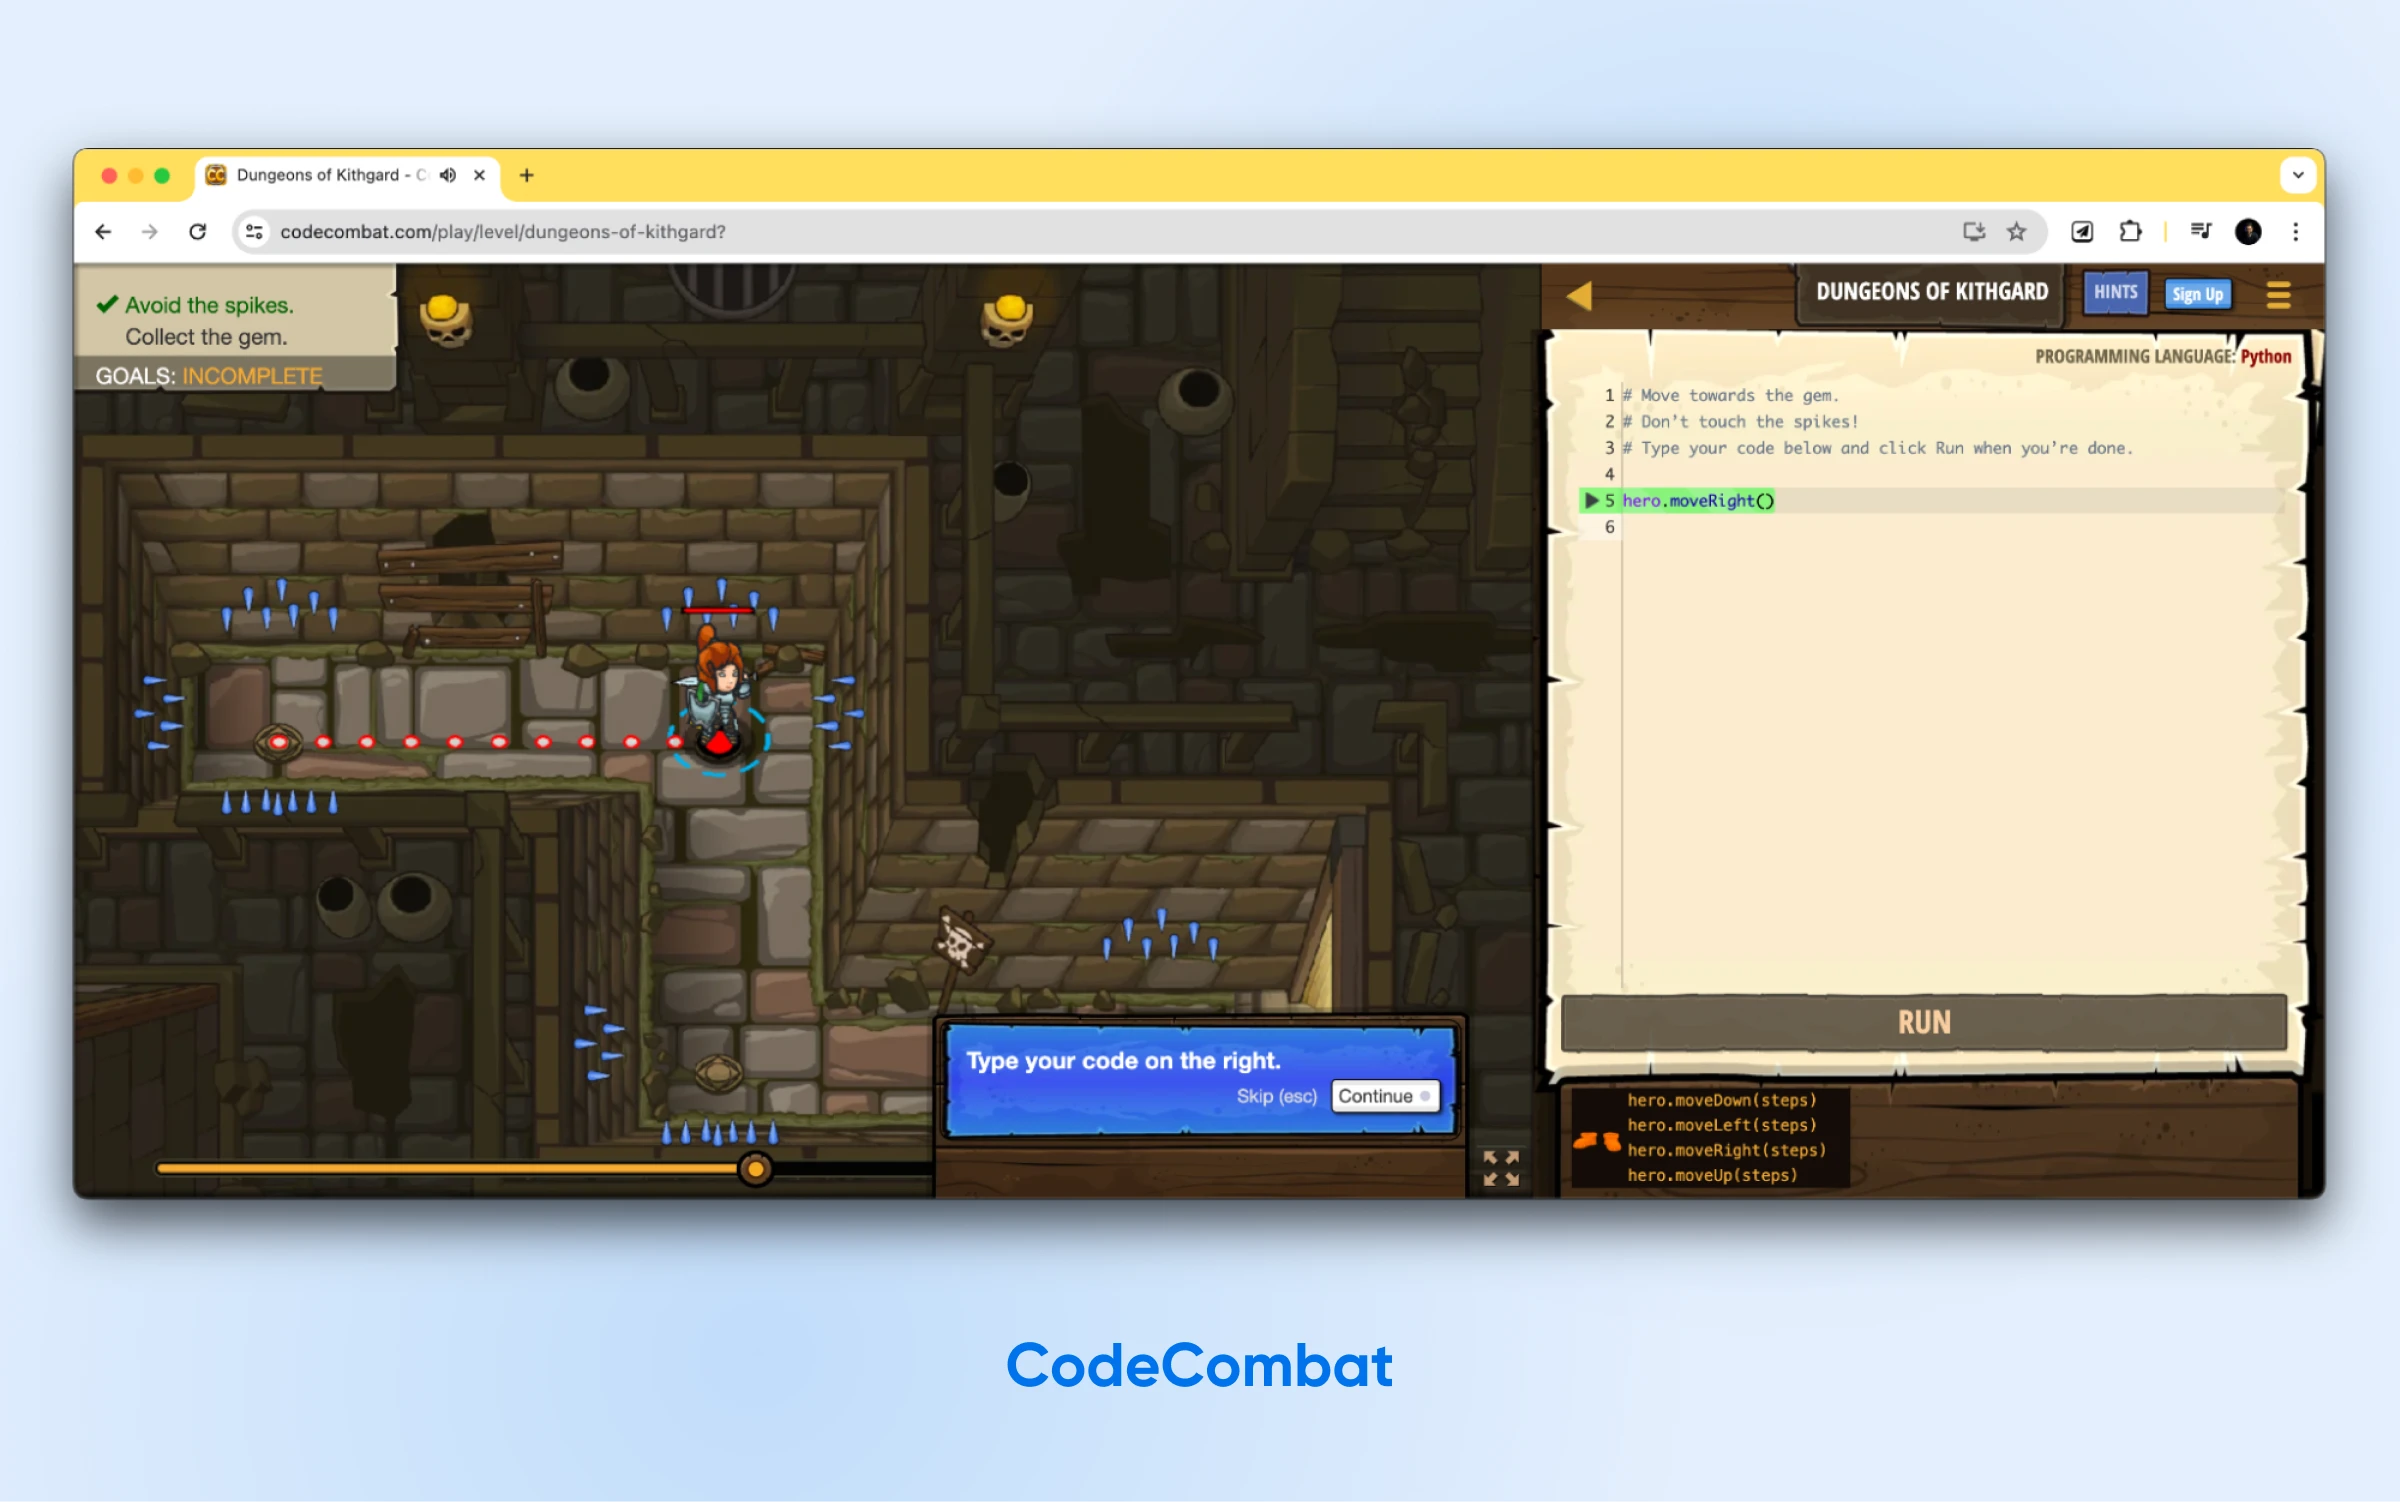 CodeCombat's medieval-style game with instructions to "Type your code on the right" and a button to "RUN" the code. 